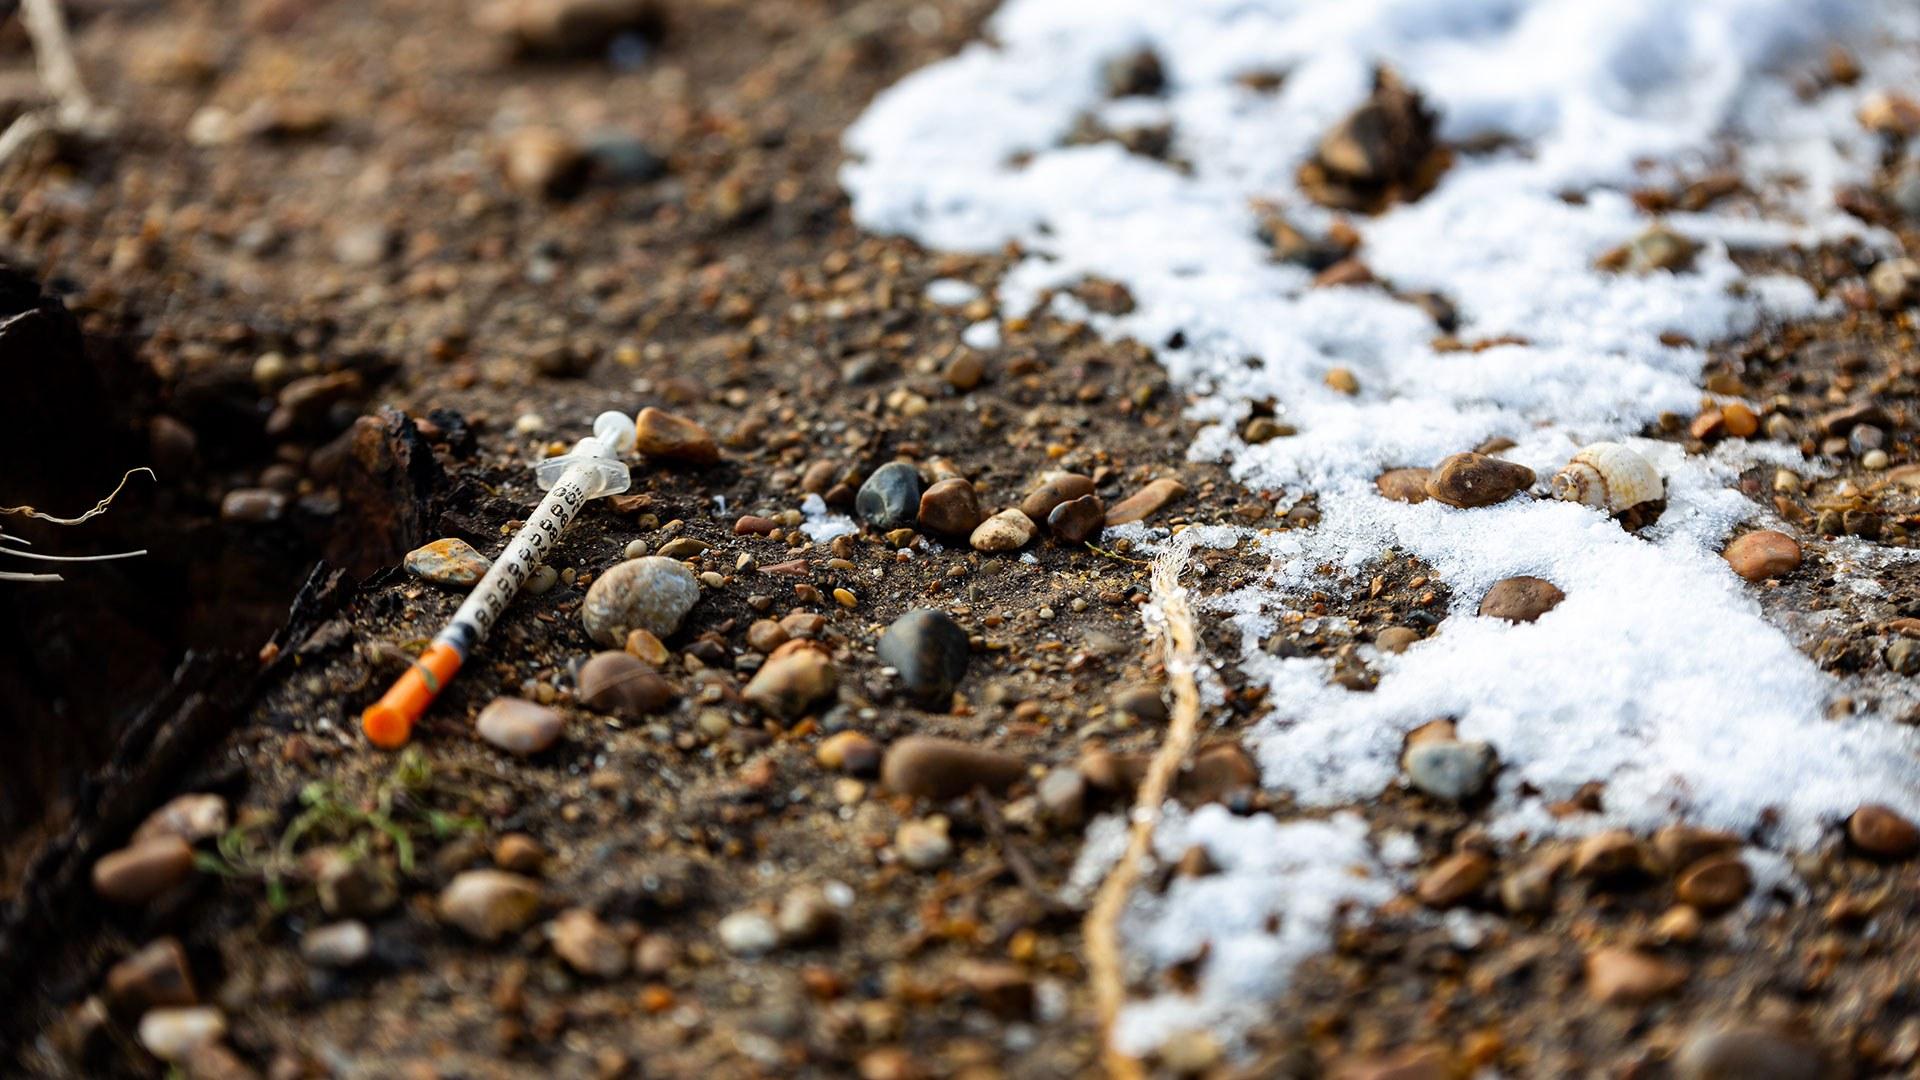 A discarded drug needle left on the ground